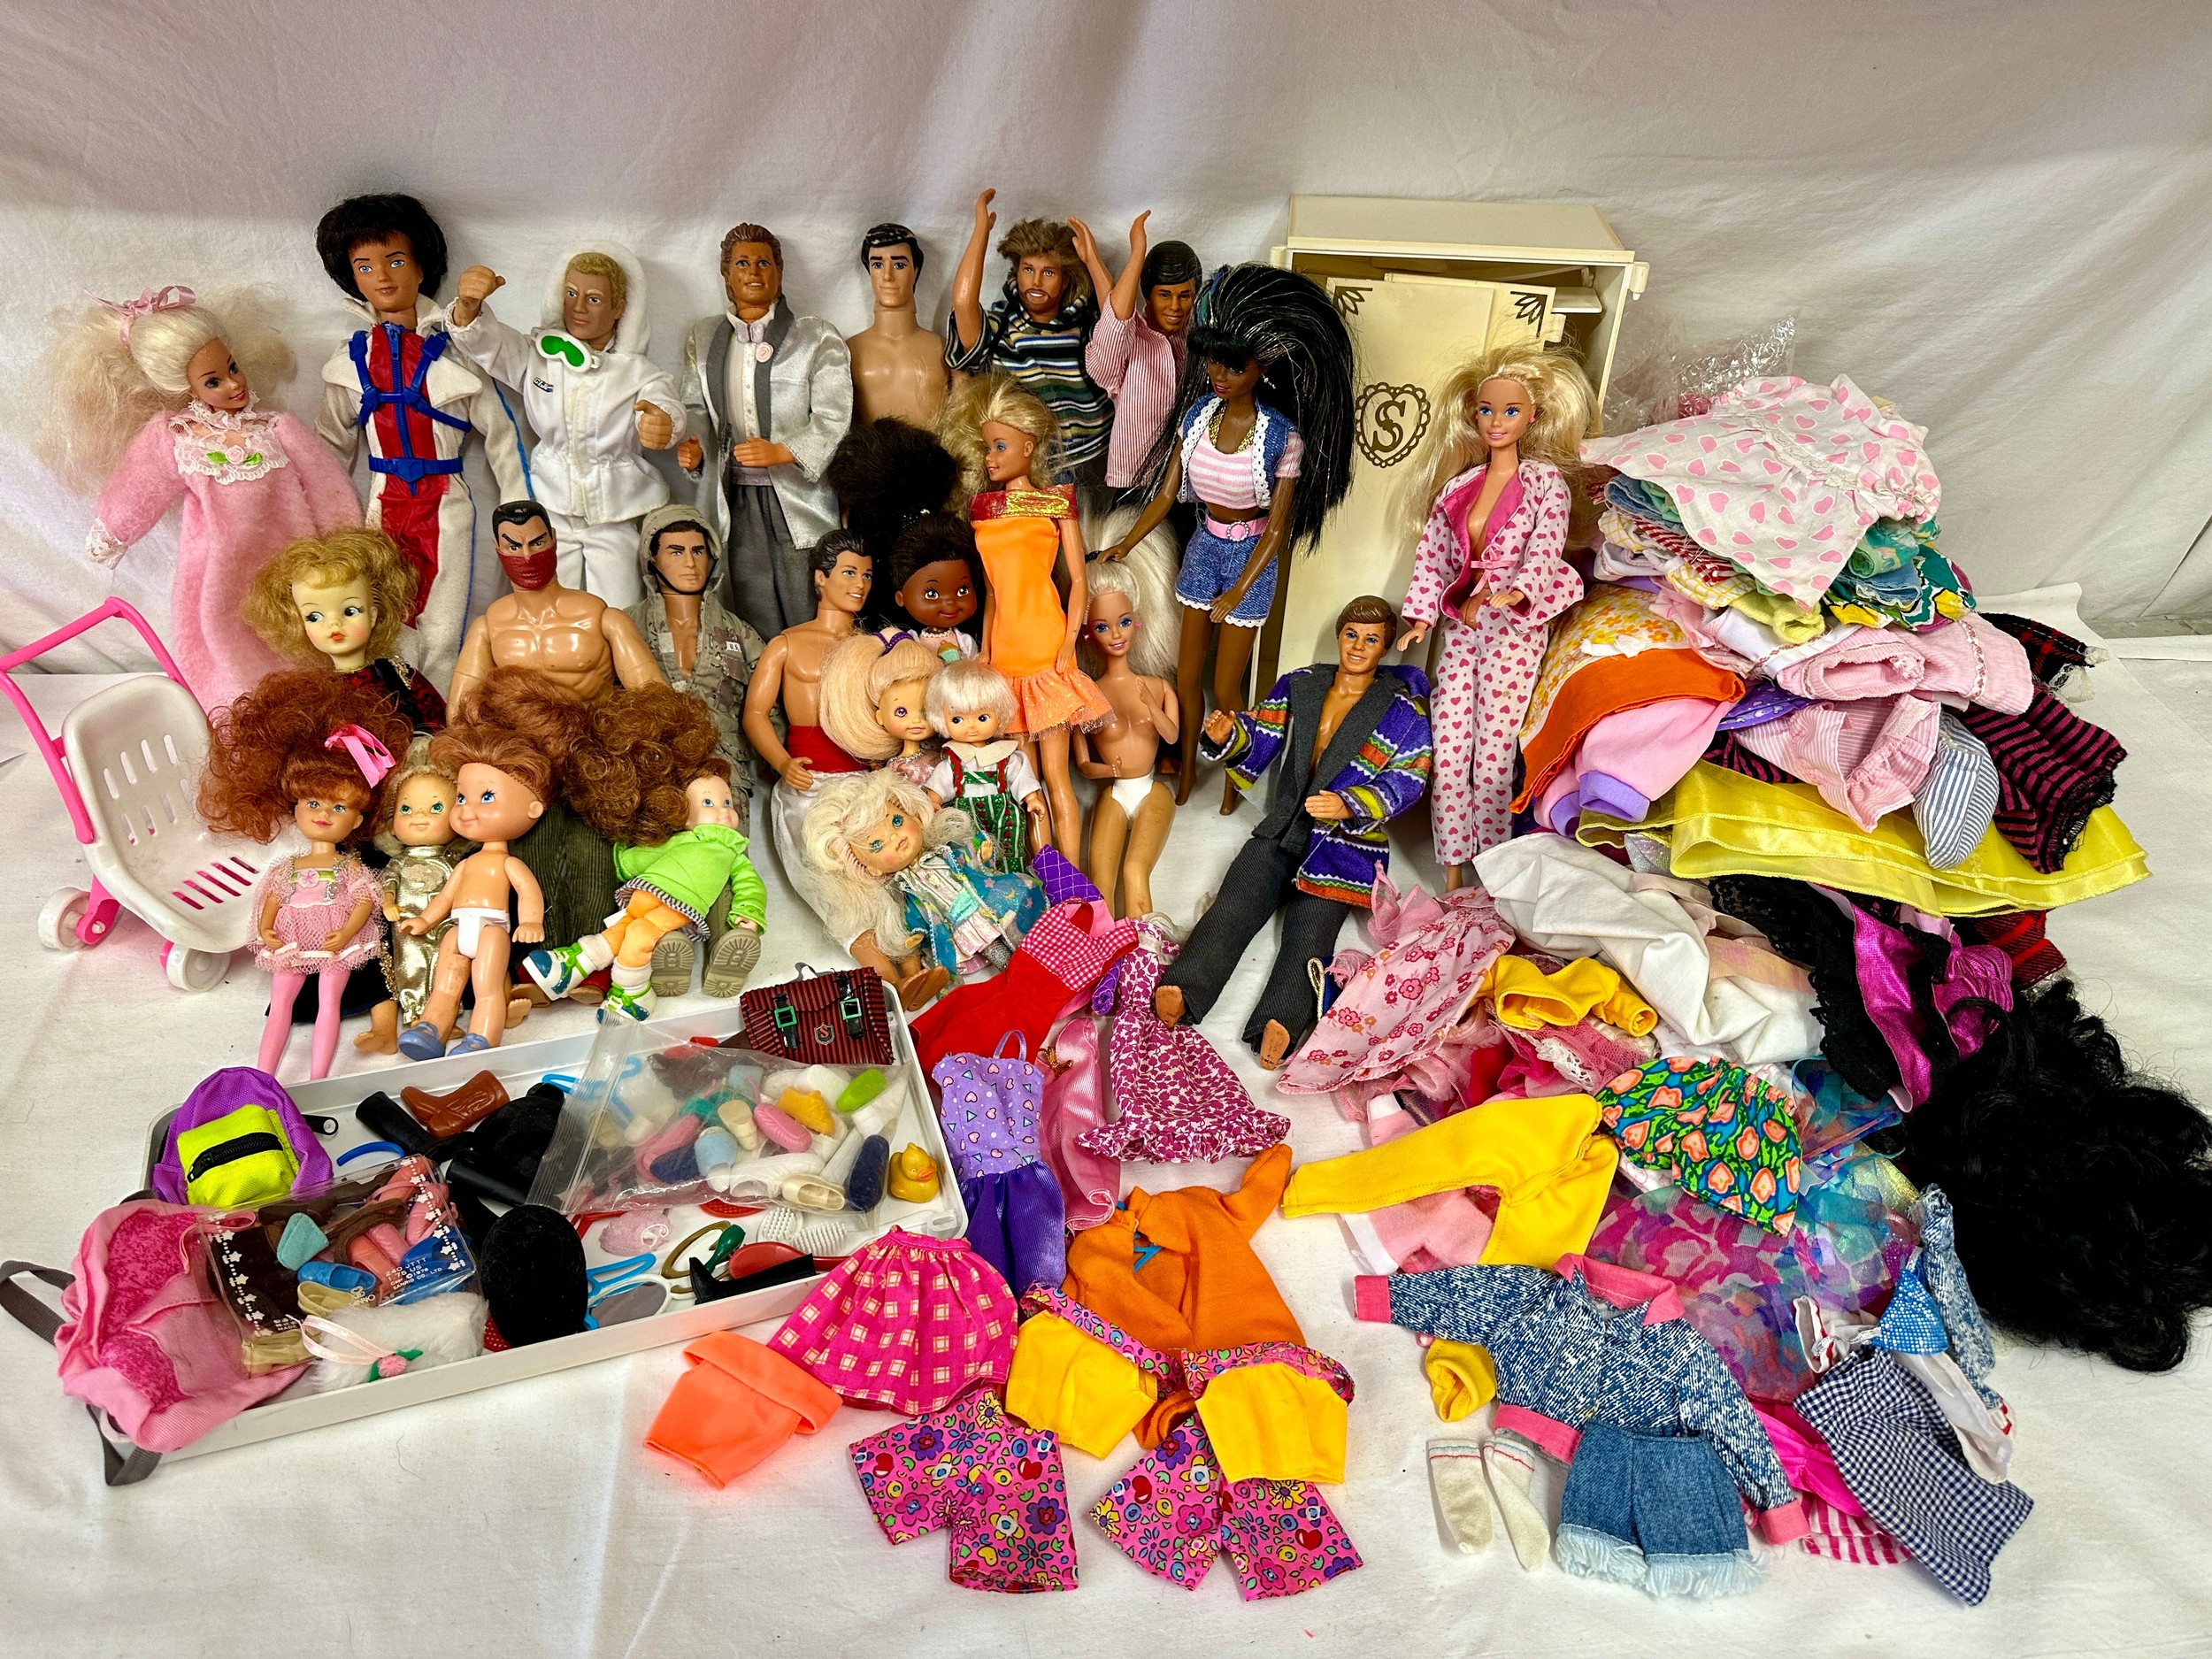 A mixed collection comprising of Barbies, Ken's and GI Joe along with some original Barbie clothes